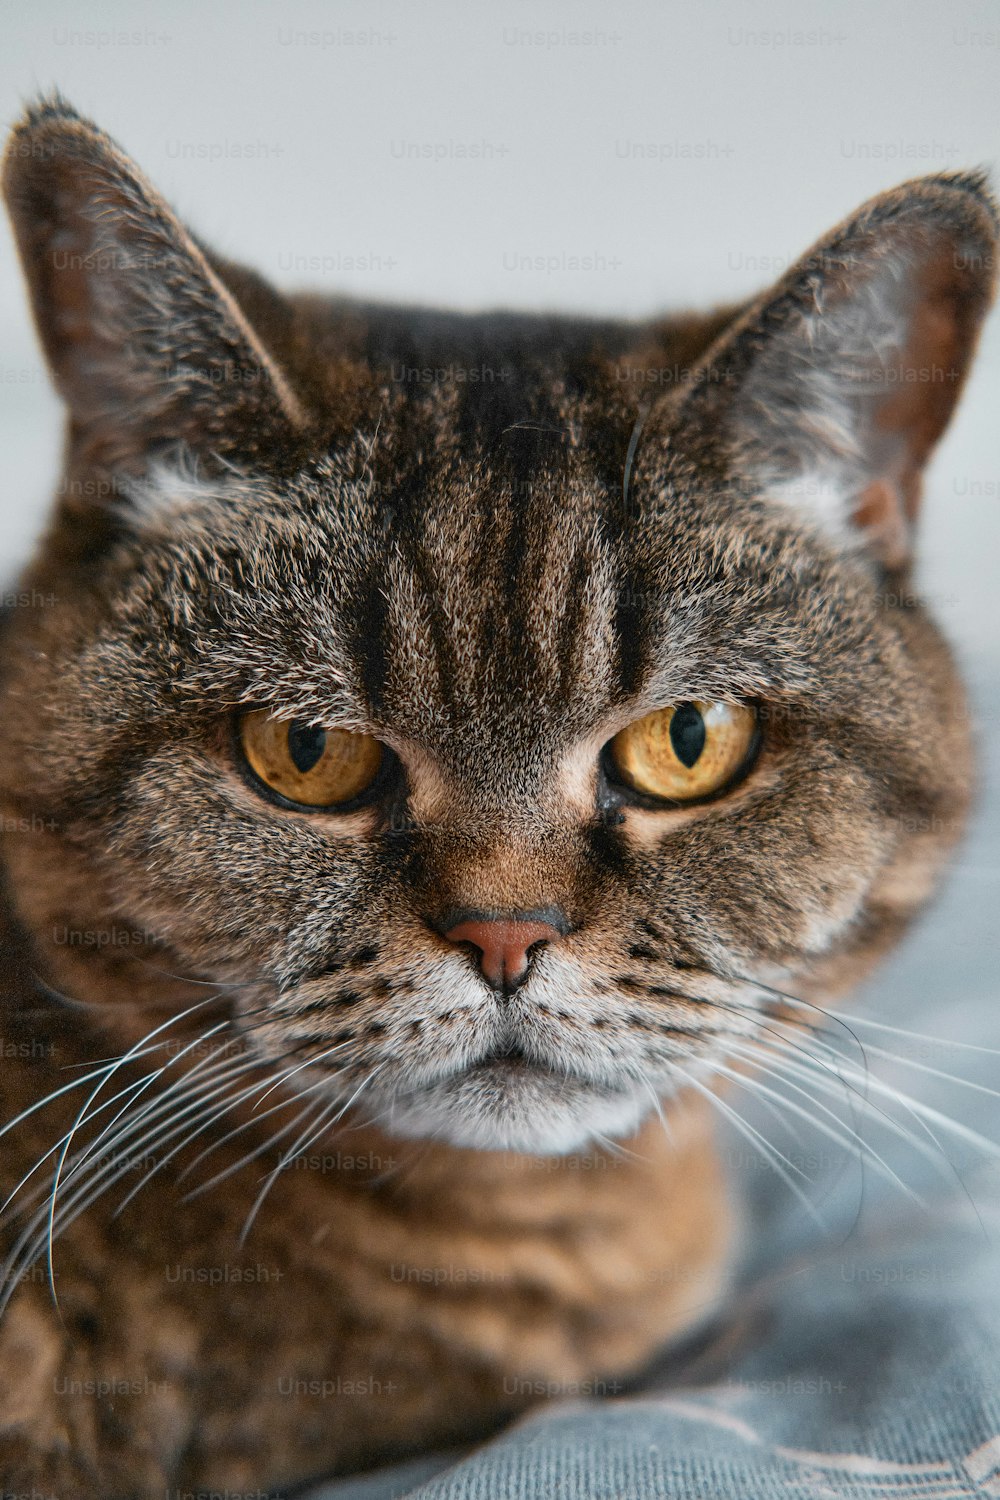 Angry Cat Face, Close Up, Looking Straight into Camera Stock Image